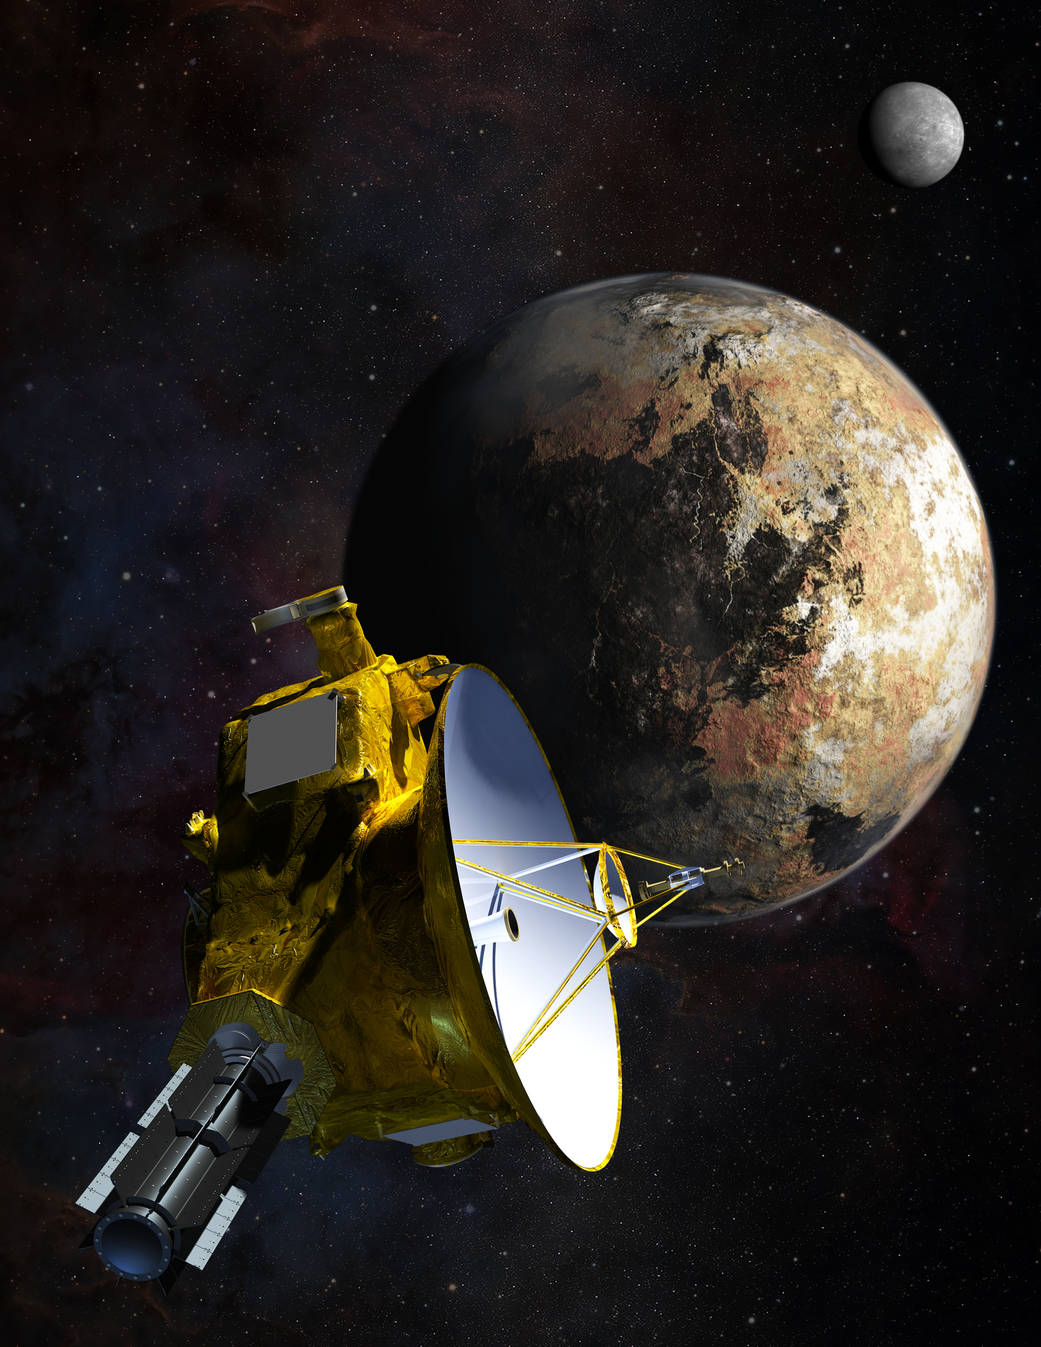 Artist’s concept of the New Horizons spacecraft as it approaches Pluto and its largest moon, Charon, in July 2015.